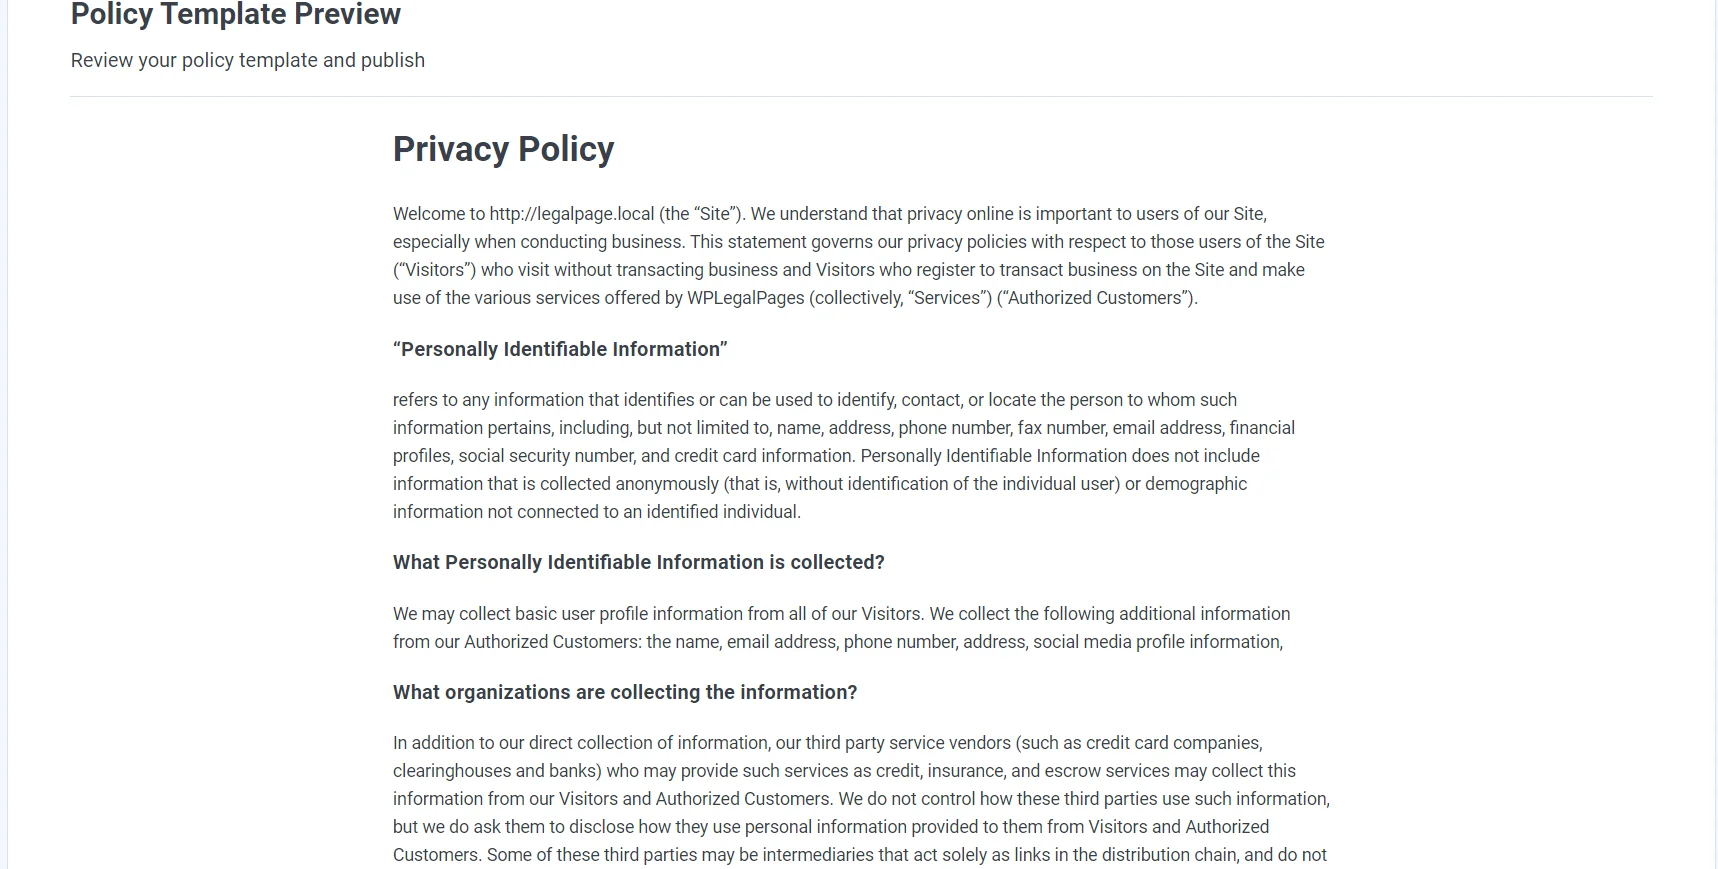 Checking the Preview of Amazon affiliate privacy policy